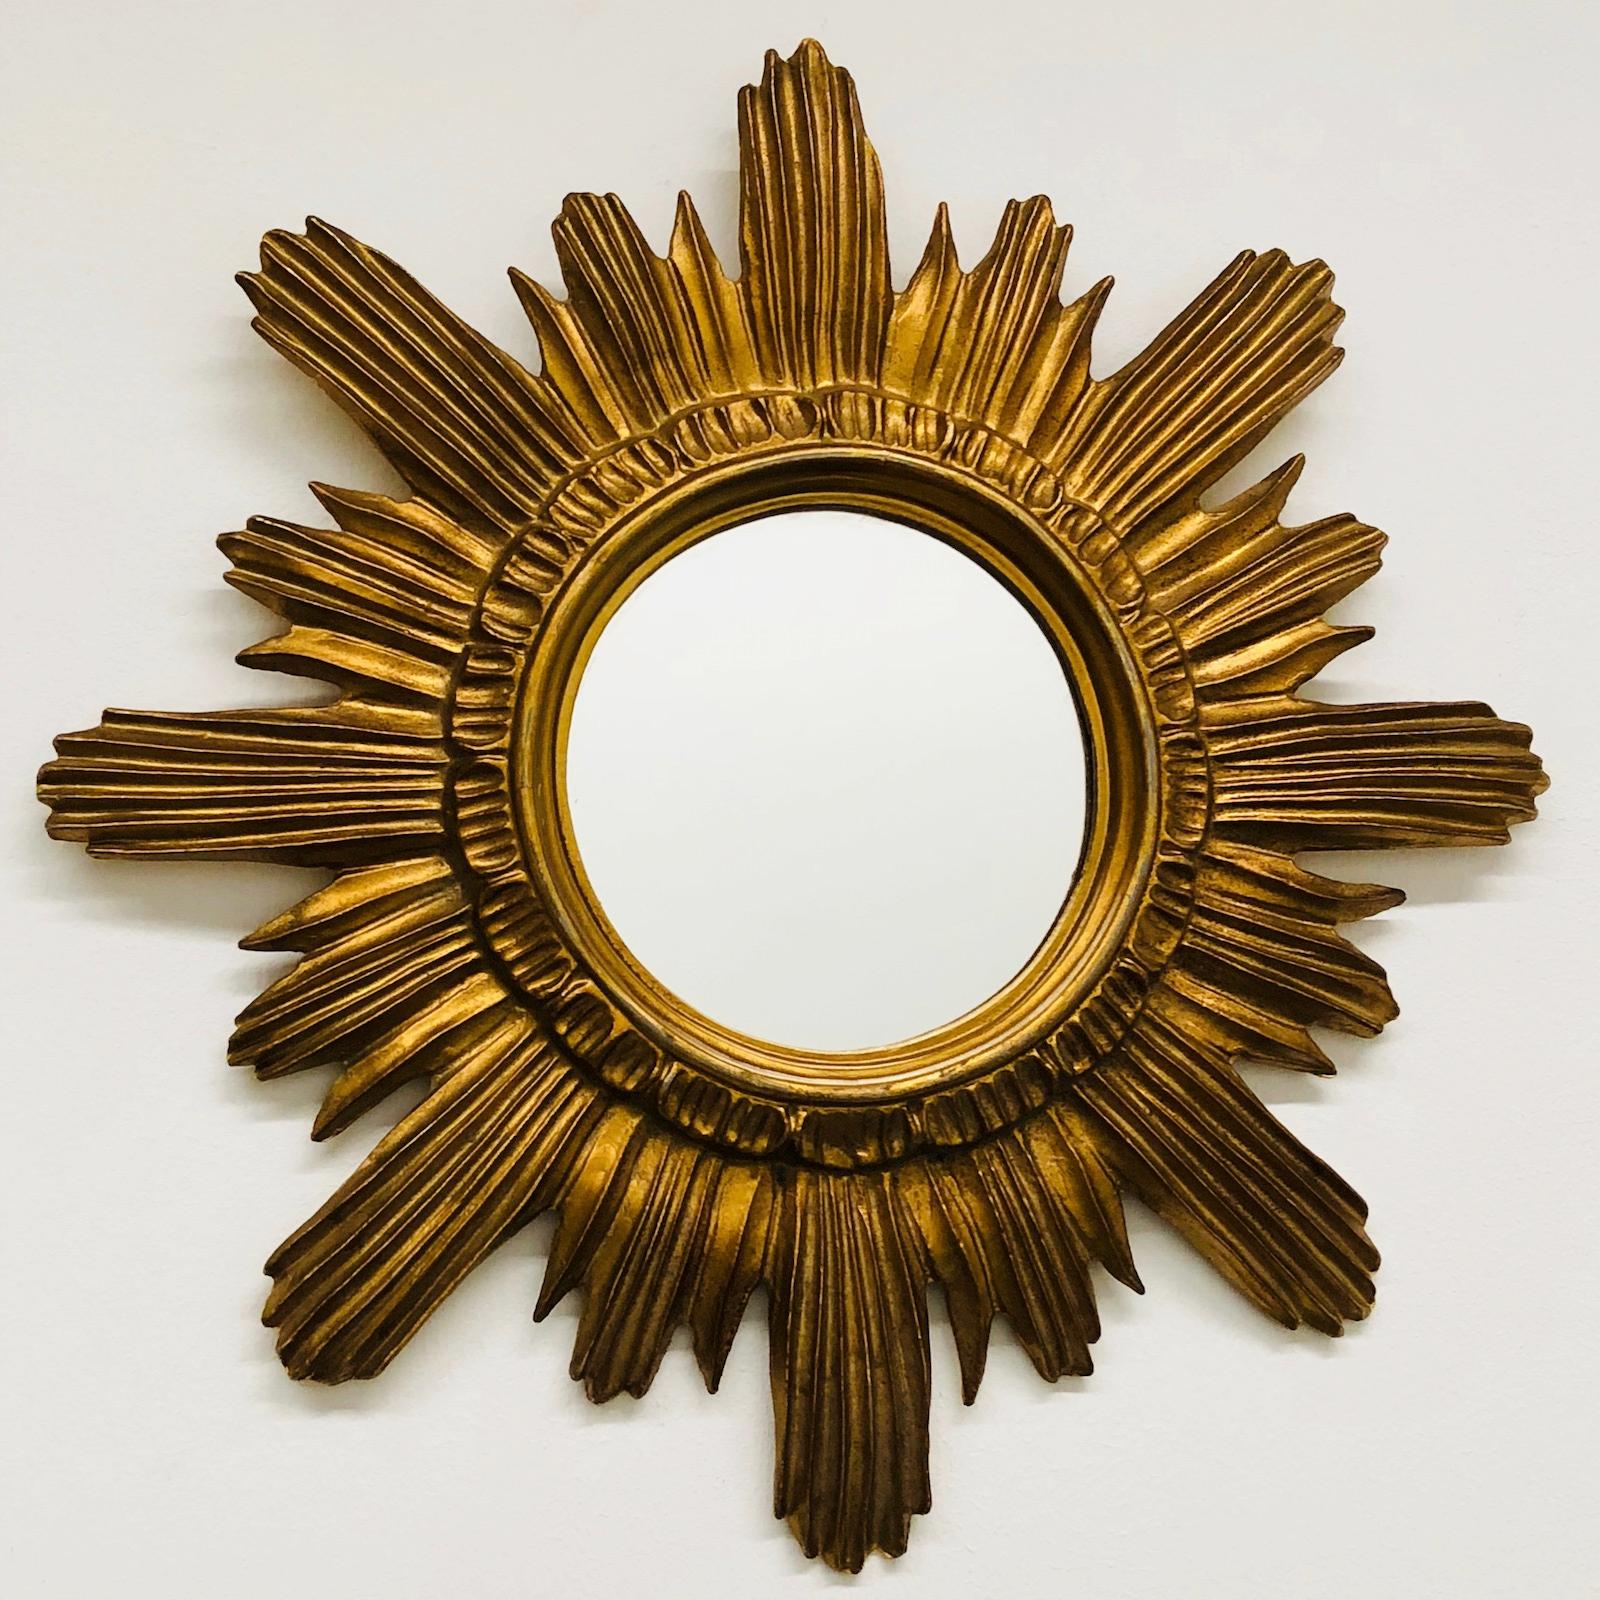 A beautiful starburst or sunburst mirror. Made of plastic, gilded, nice patina. No chips, no cracks, no repairs. It measures approximate 16 3/8